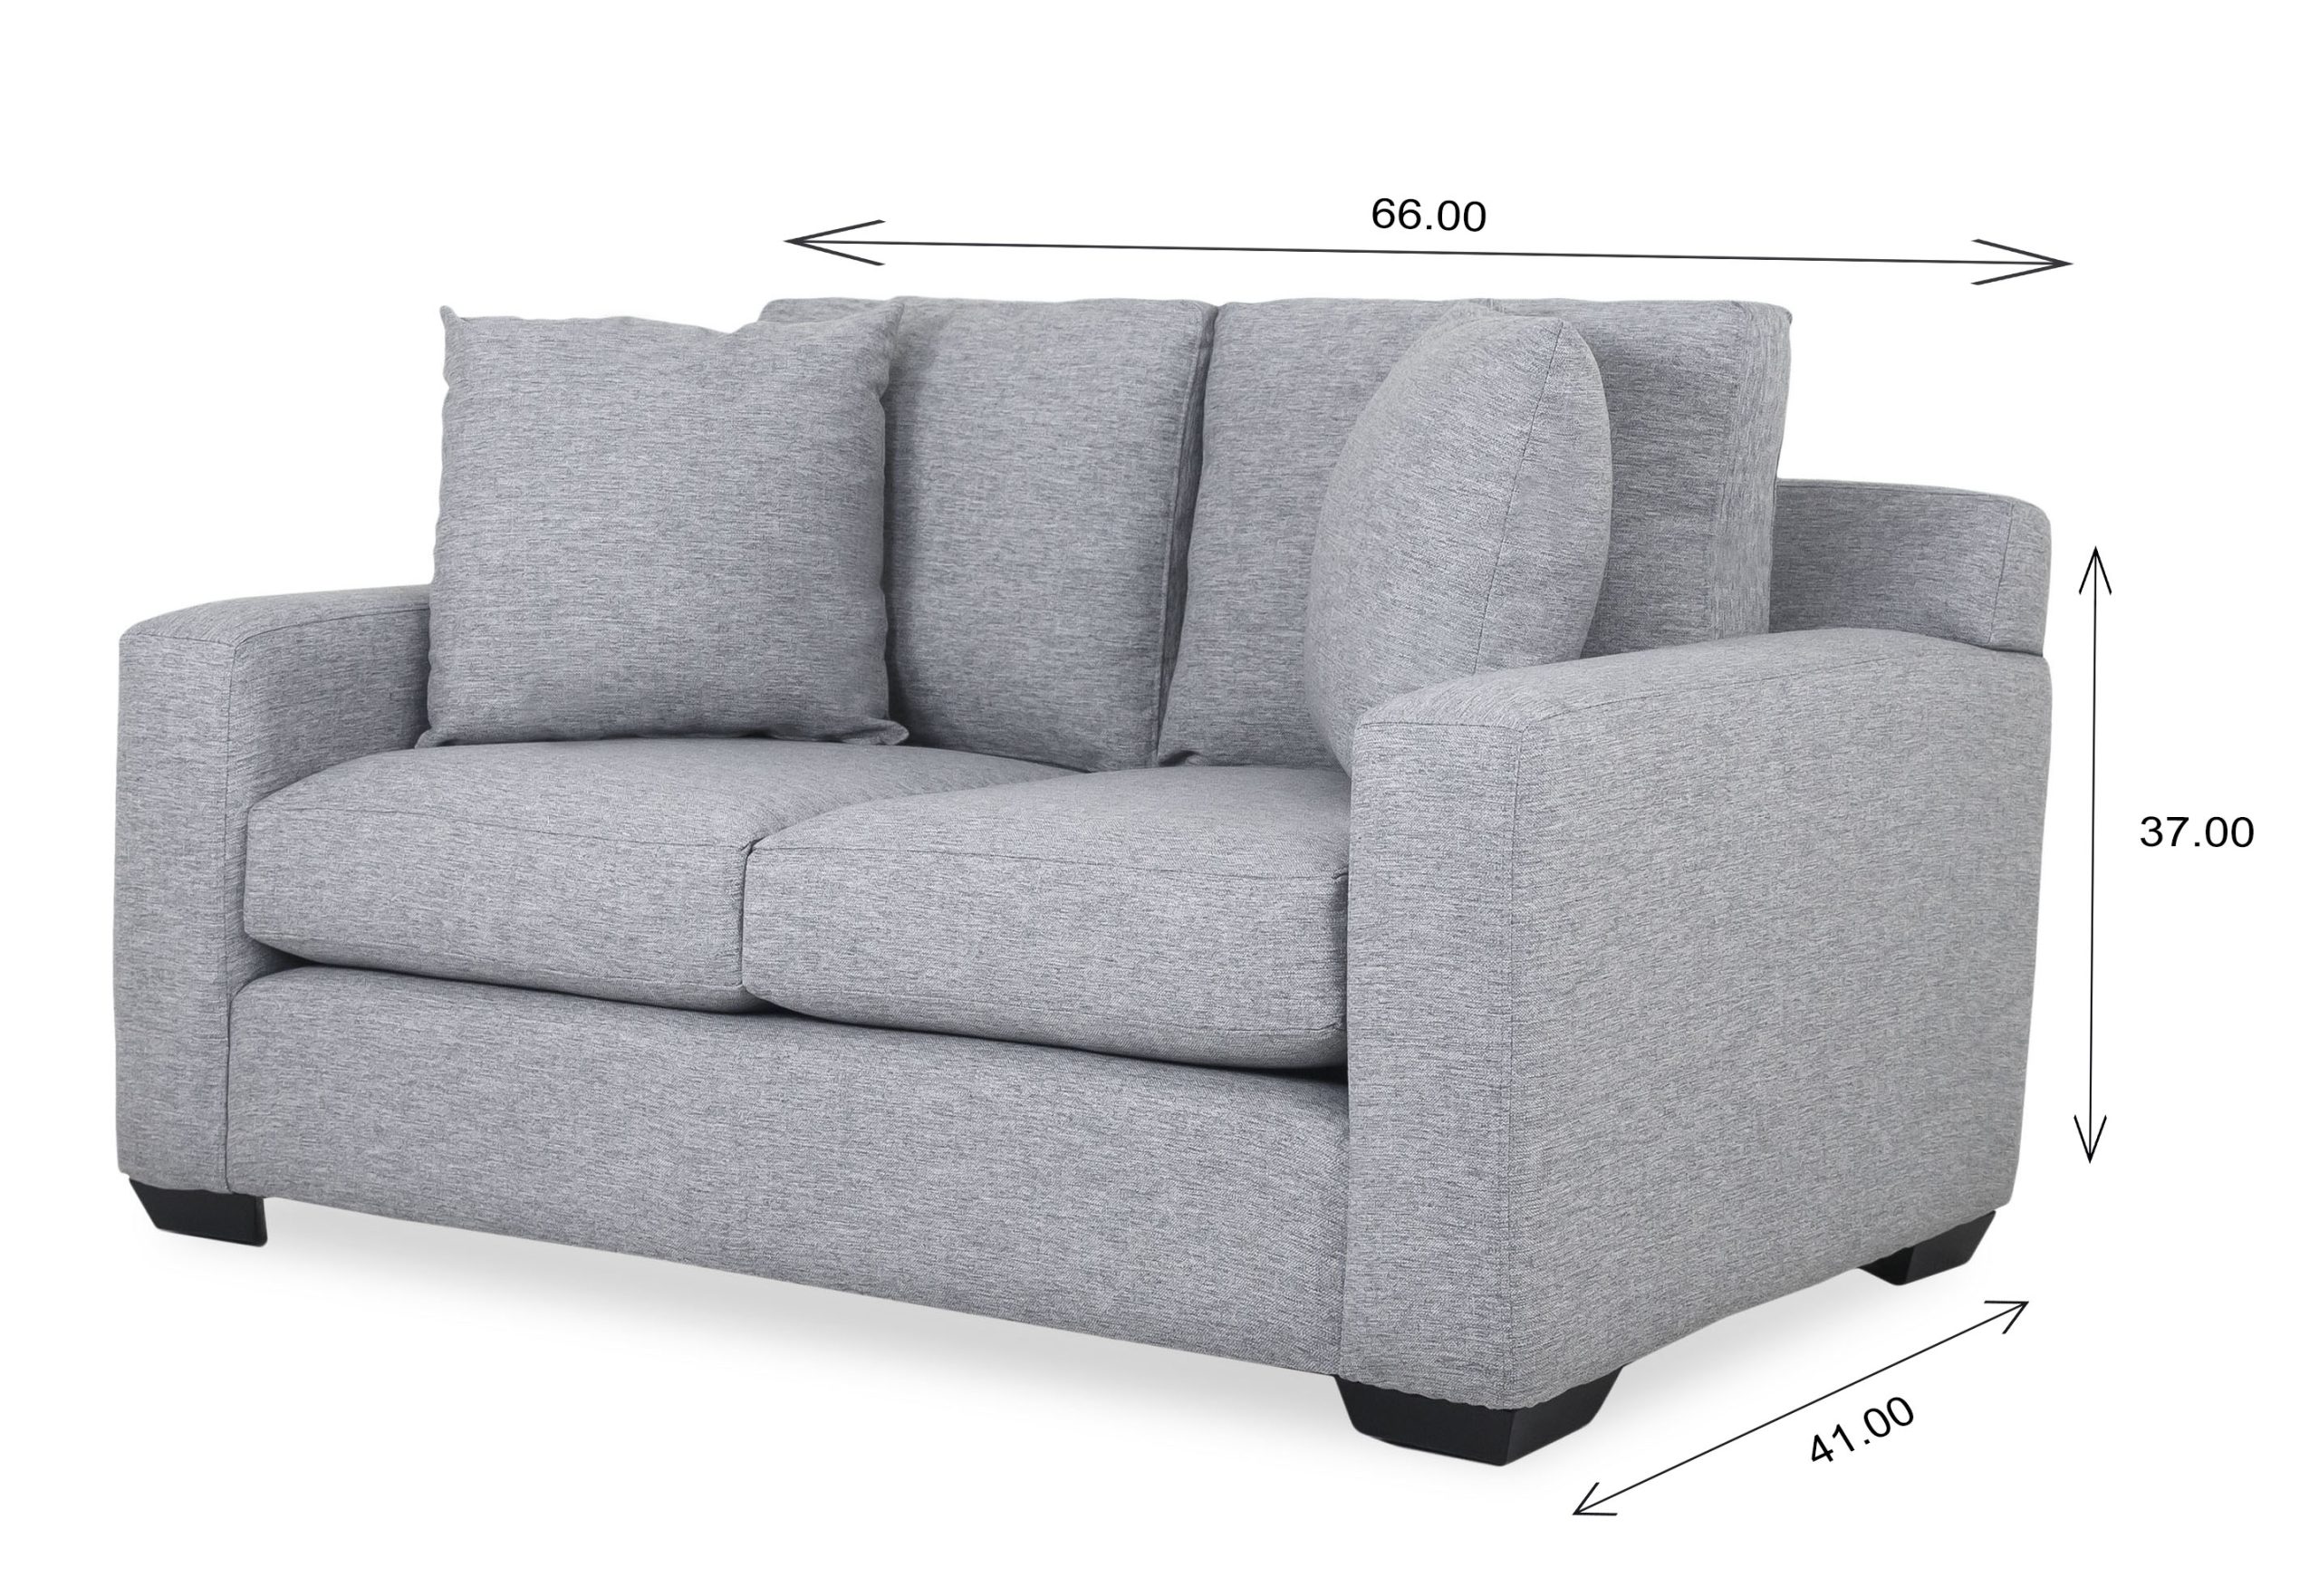 Malmo Sectional with Dimensions